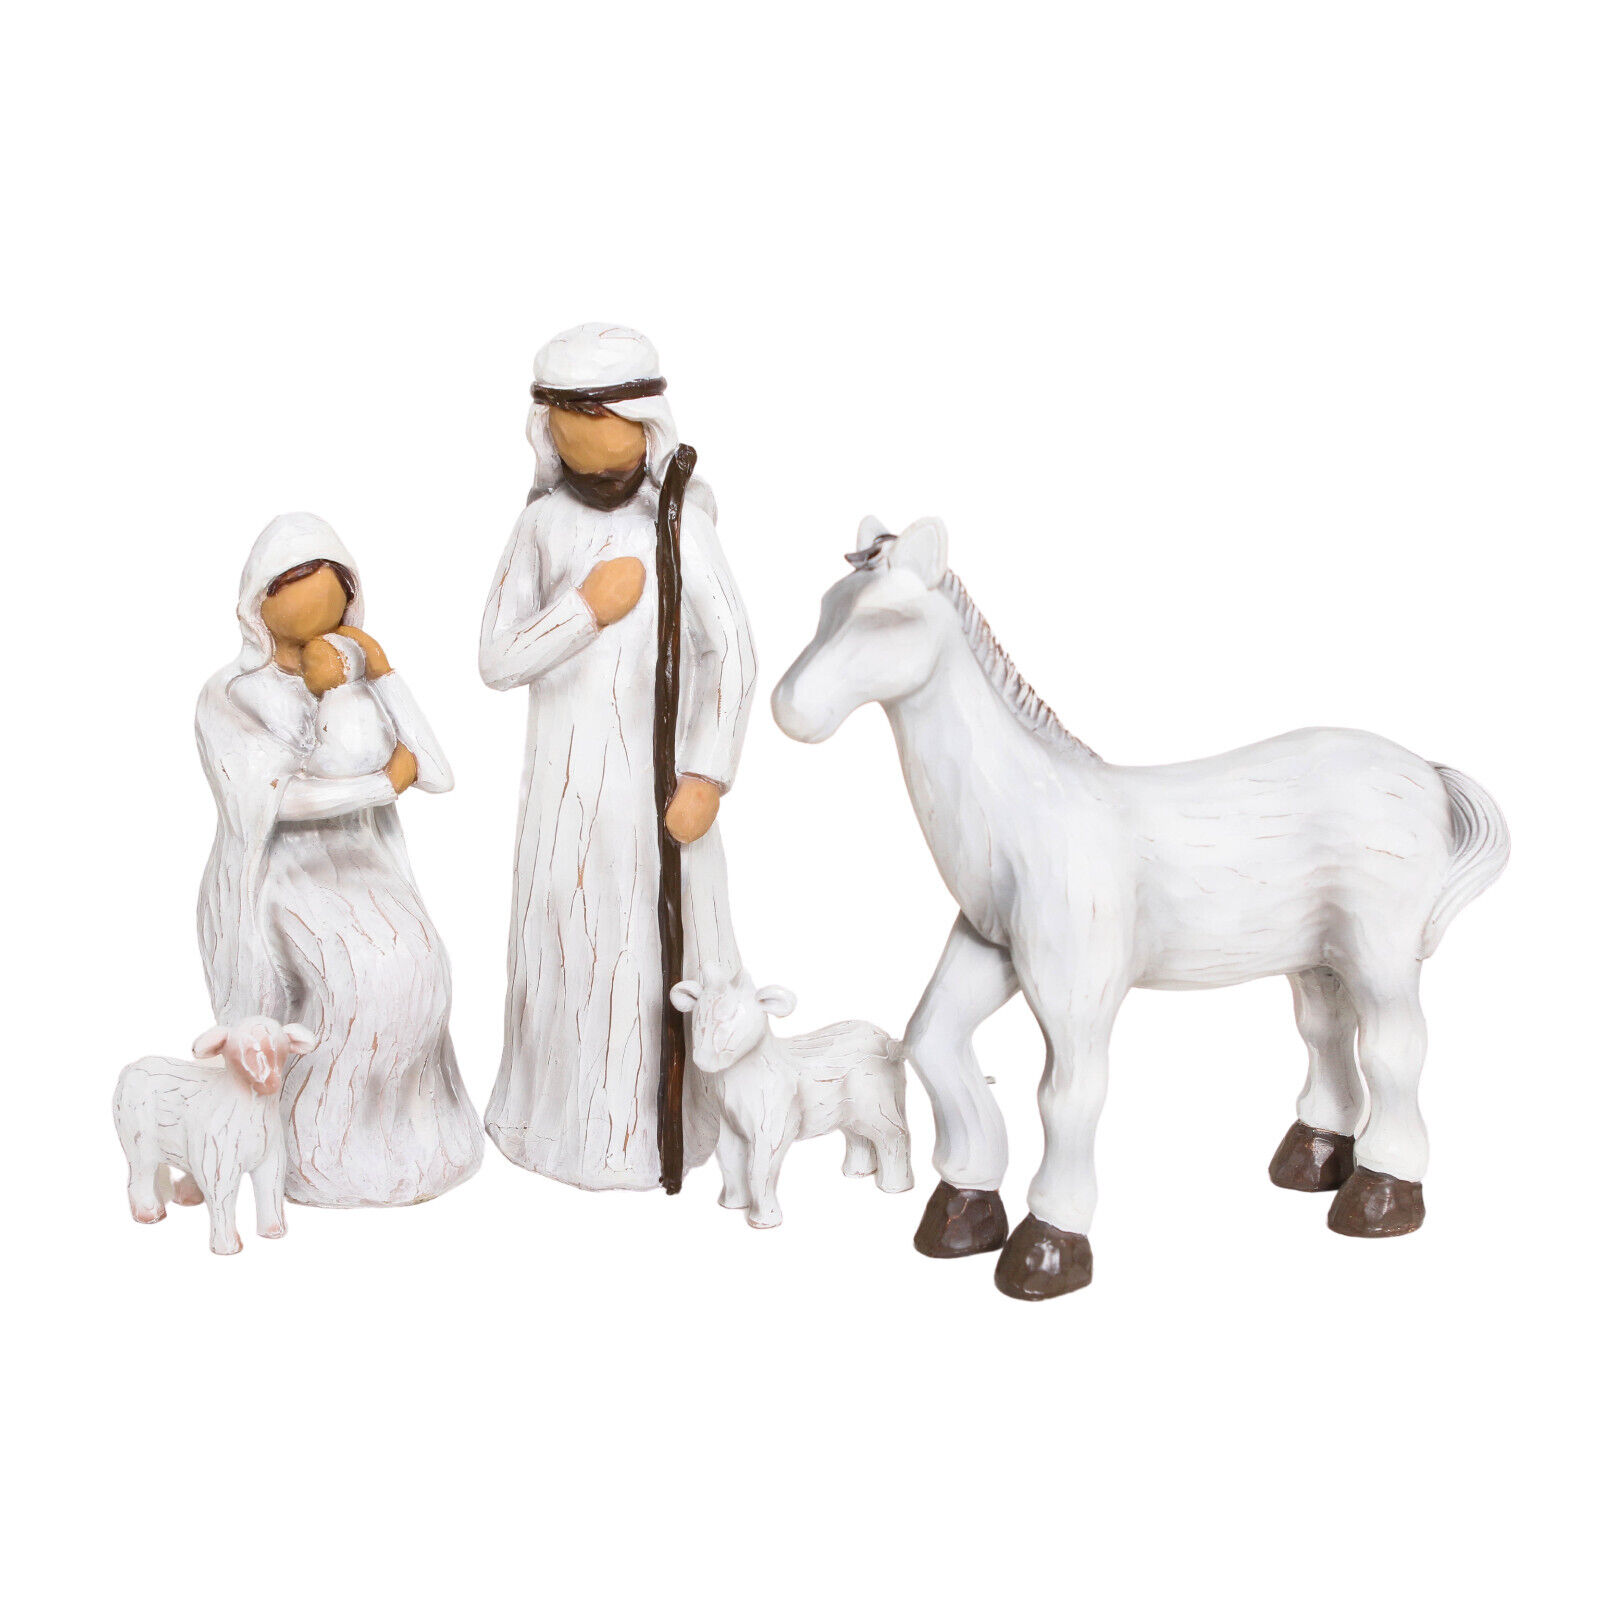 5-piece Large Christmas Nativity Set Indoor Figurines, Distressed White